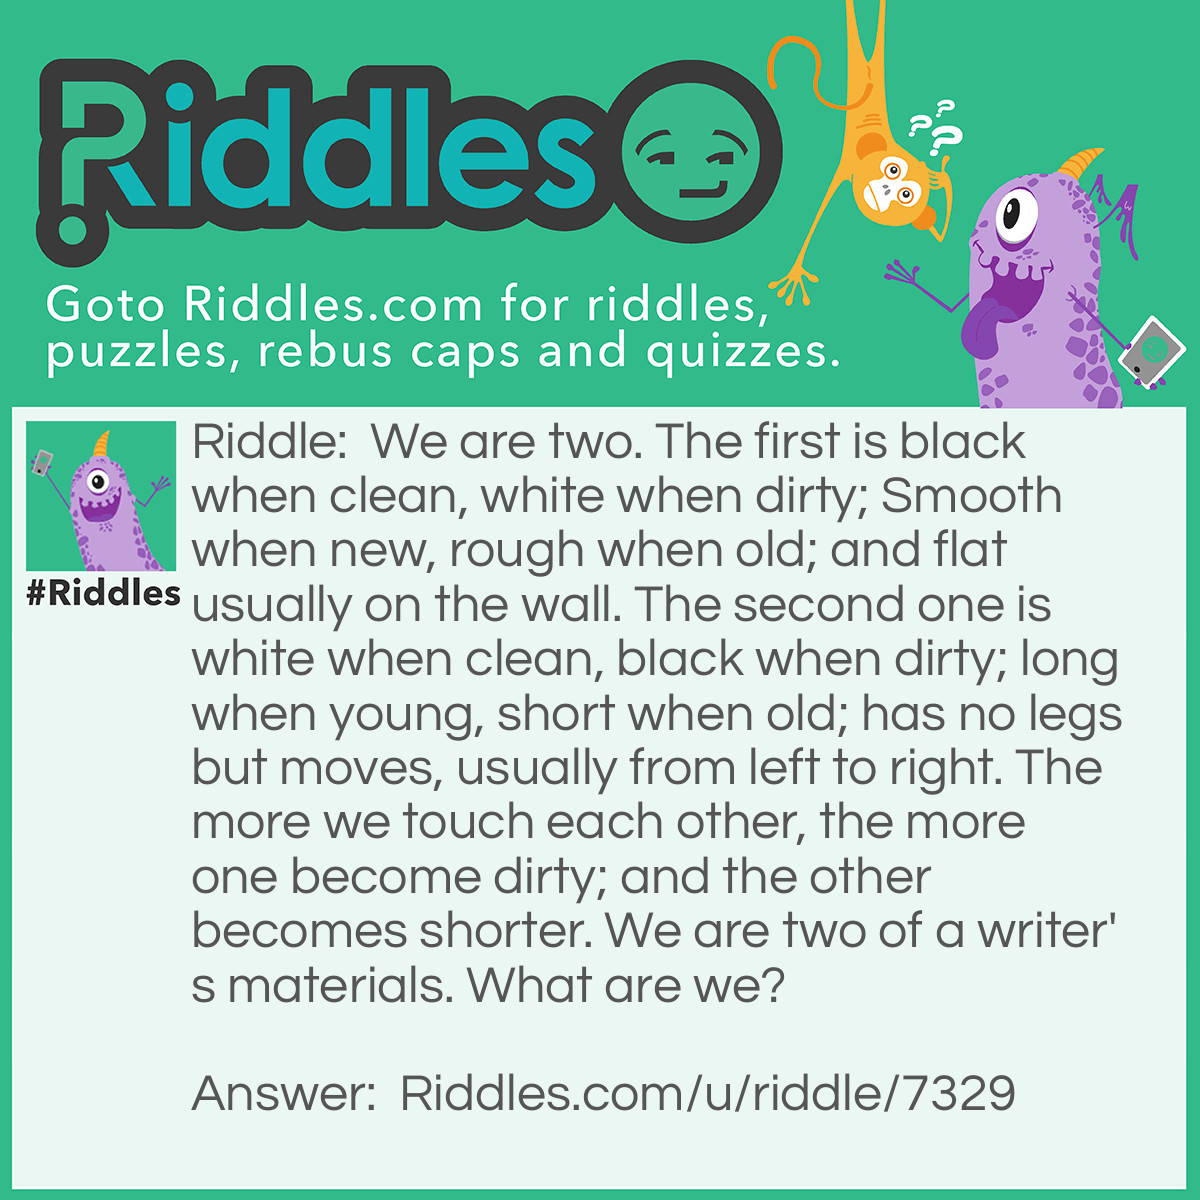 Riddle: We are two. The first is black when clean, white when dirty; Smooth when new, rough when old; and flat usually on the wall. The second one is white when clean, black when dirty; long when young, short when old; has no legs but moves, usually from left to right. The more we touch each other, the more one become dirty; and the other becomes shorter. We are two of a writer's materials. What are we? Answer: A Chalkboard (Blackboard) and a piece of white Chalk.